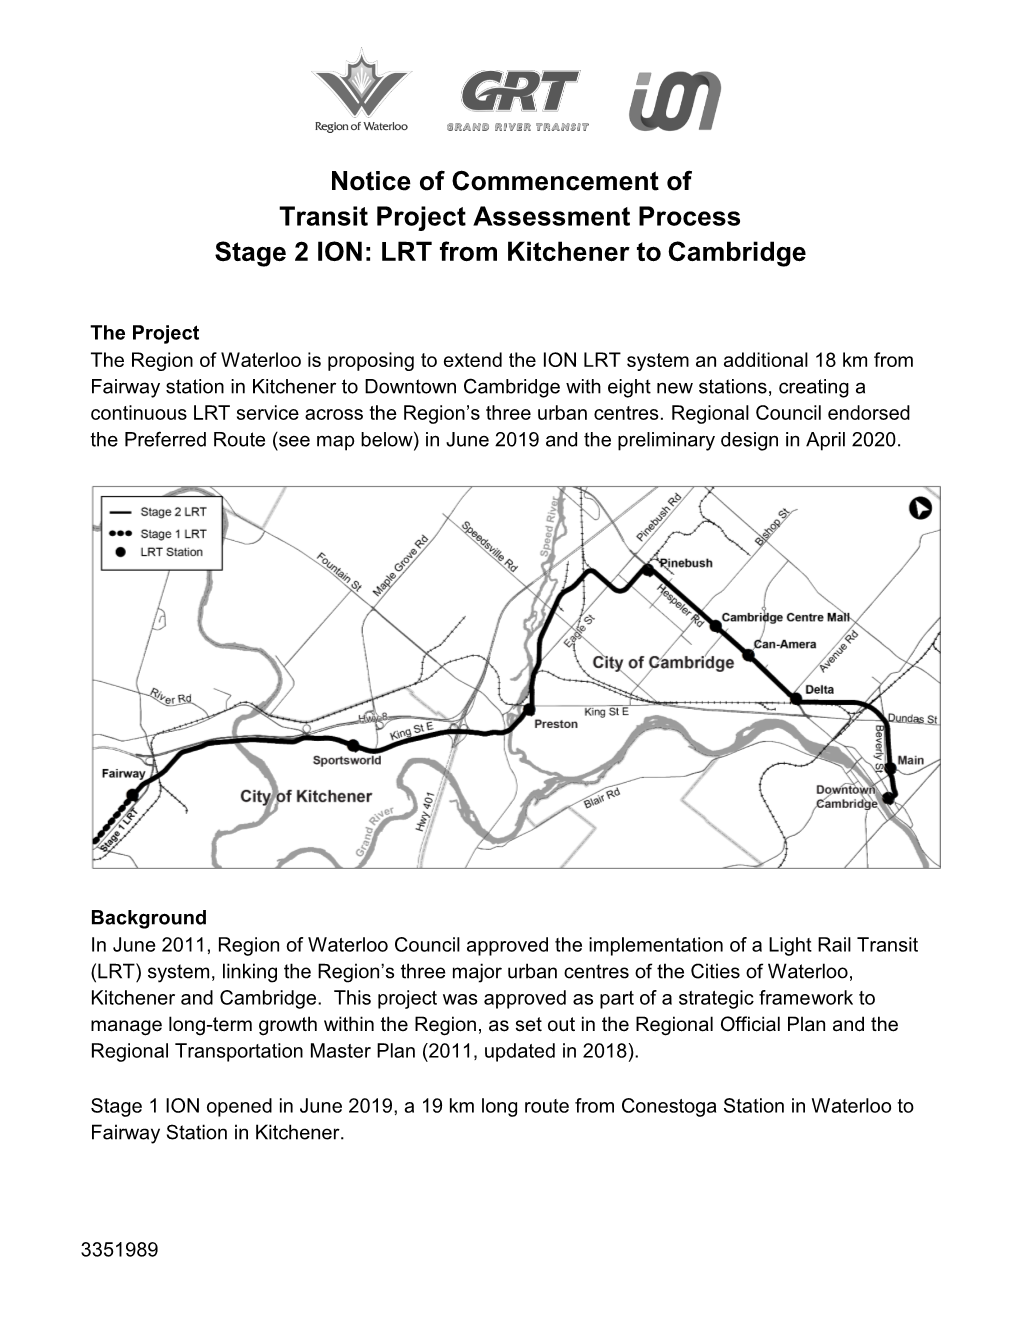 Notice of Commencement of Transit Project Assessment Process Stage 2 ION: LRT from Kitchener to Cambridge